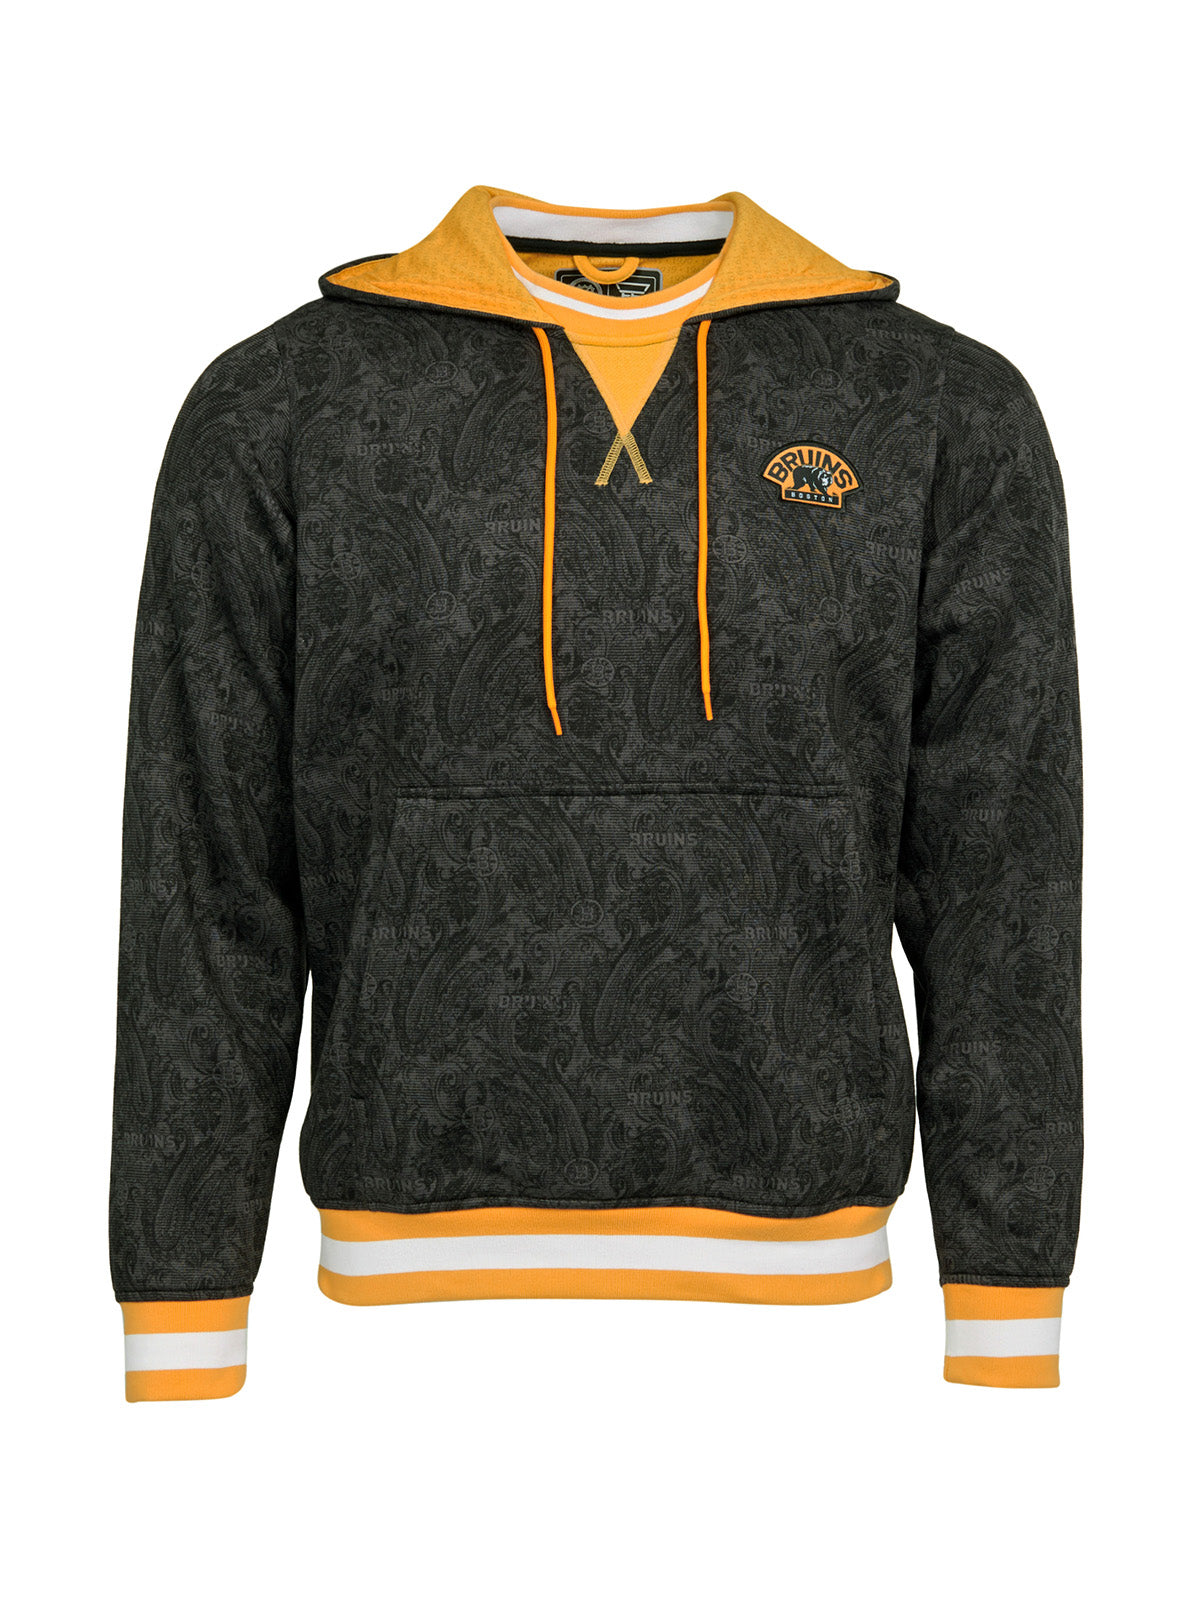 Boston Bruins Hoodie -  Show your team spirit, with the iconic team logo patch on the front left chest, and proudly display your Boston Bruins support in their team colors with this NHL hockey hoodie.